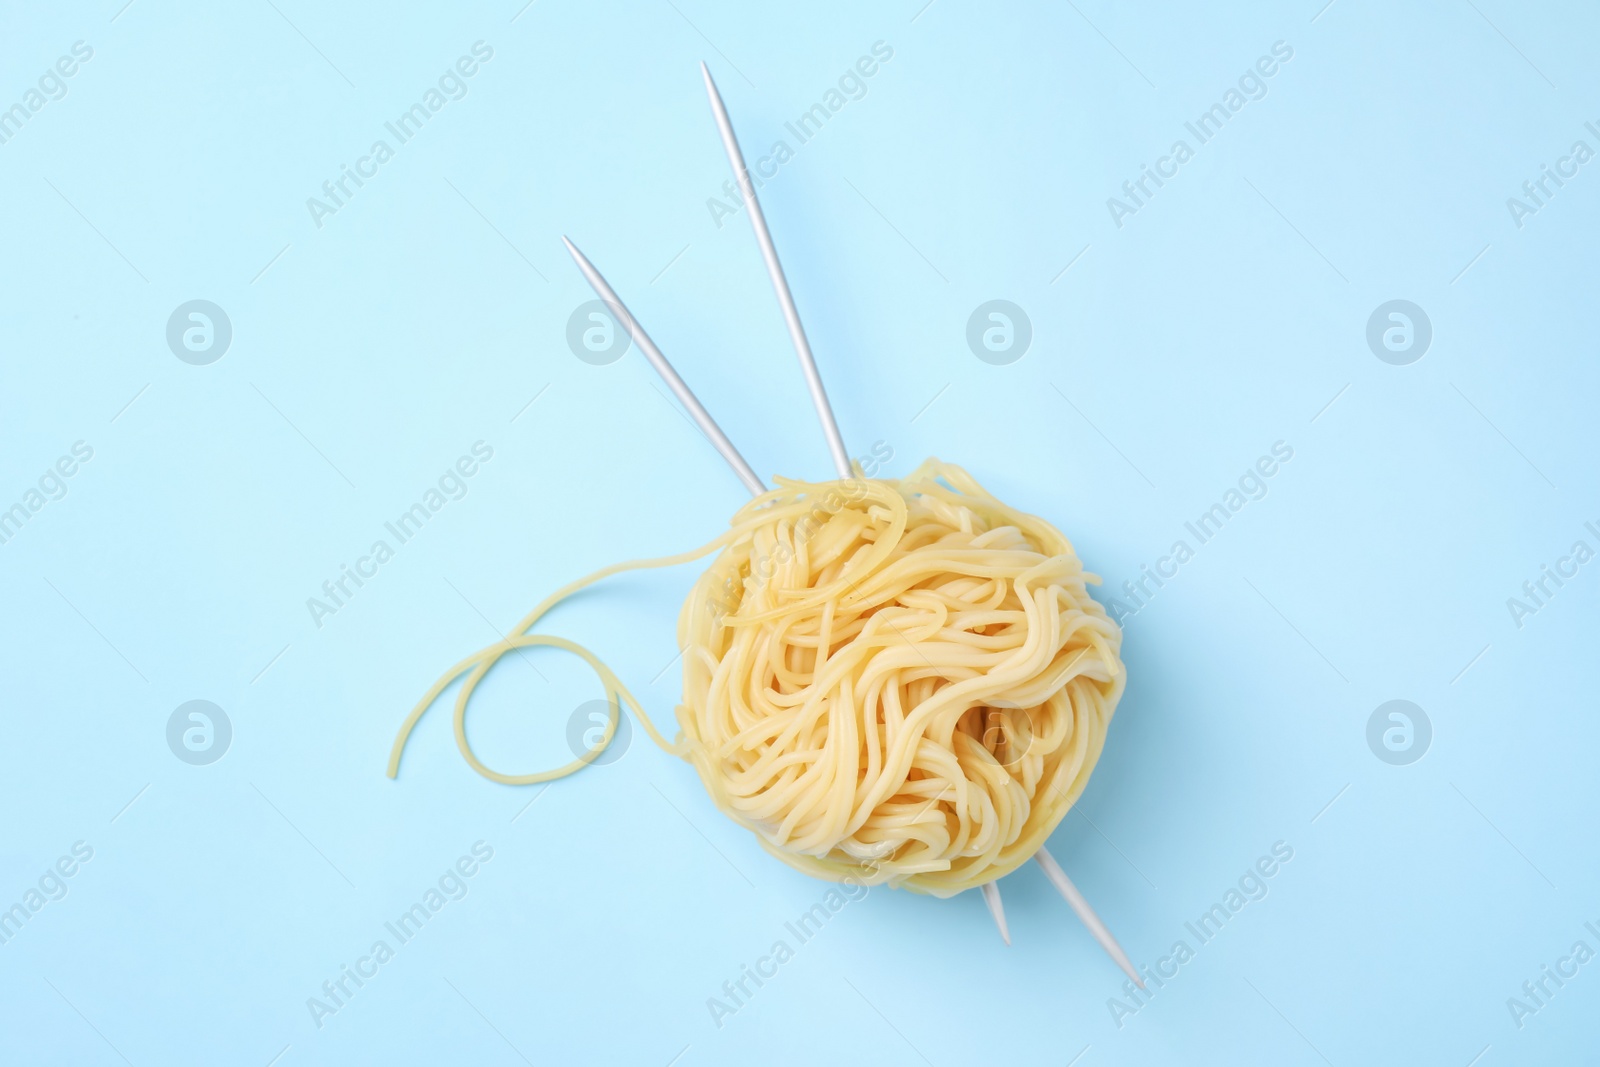 Photo of Pasta as clew with knitting needles on light blue background, top view